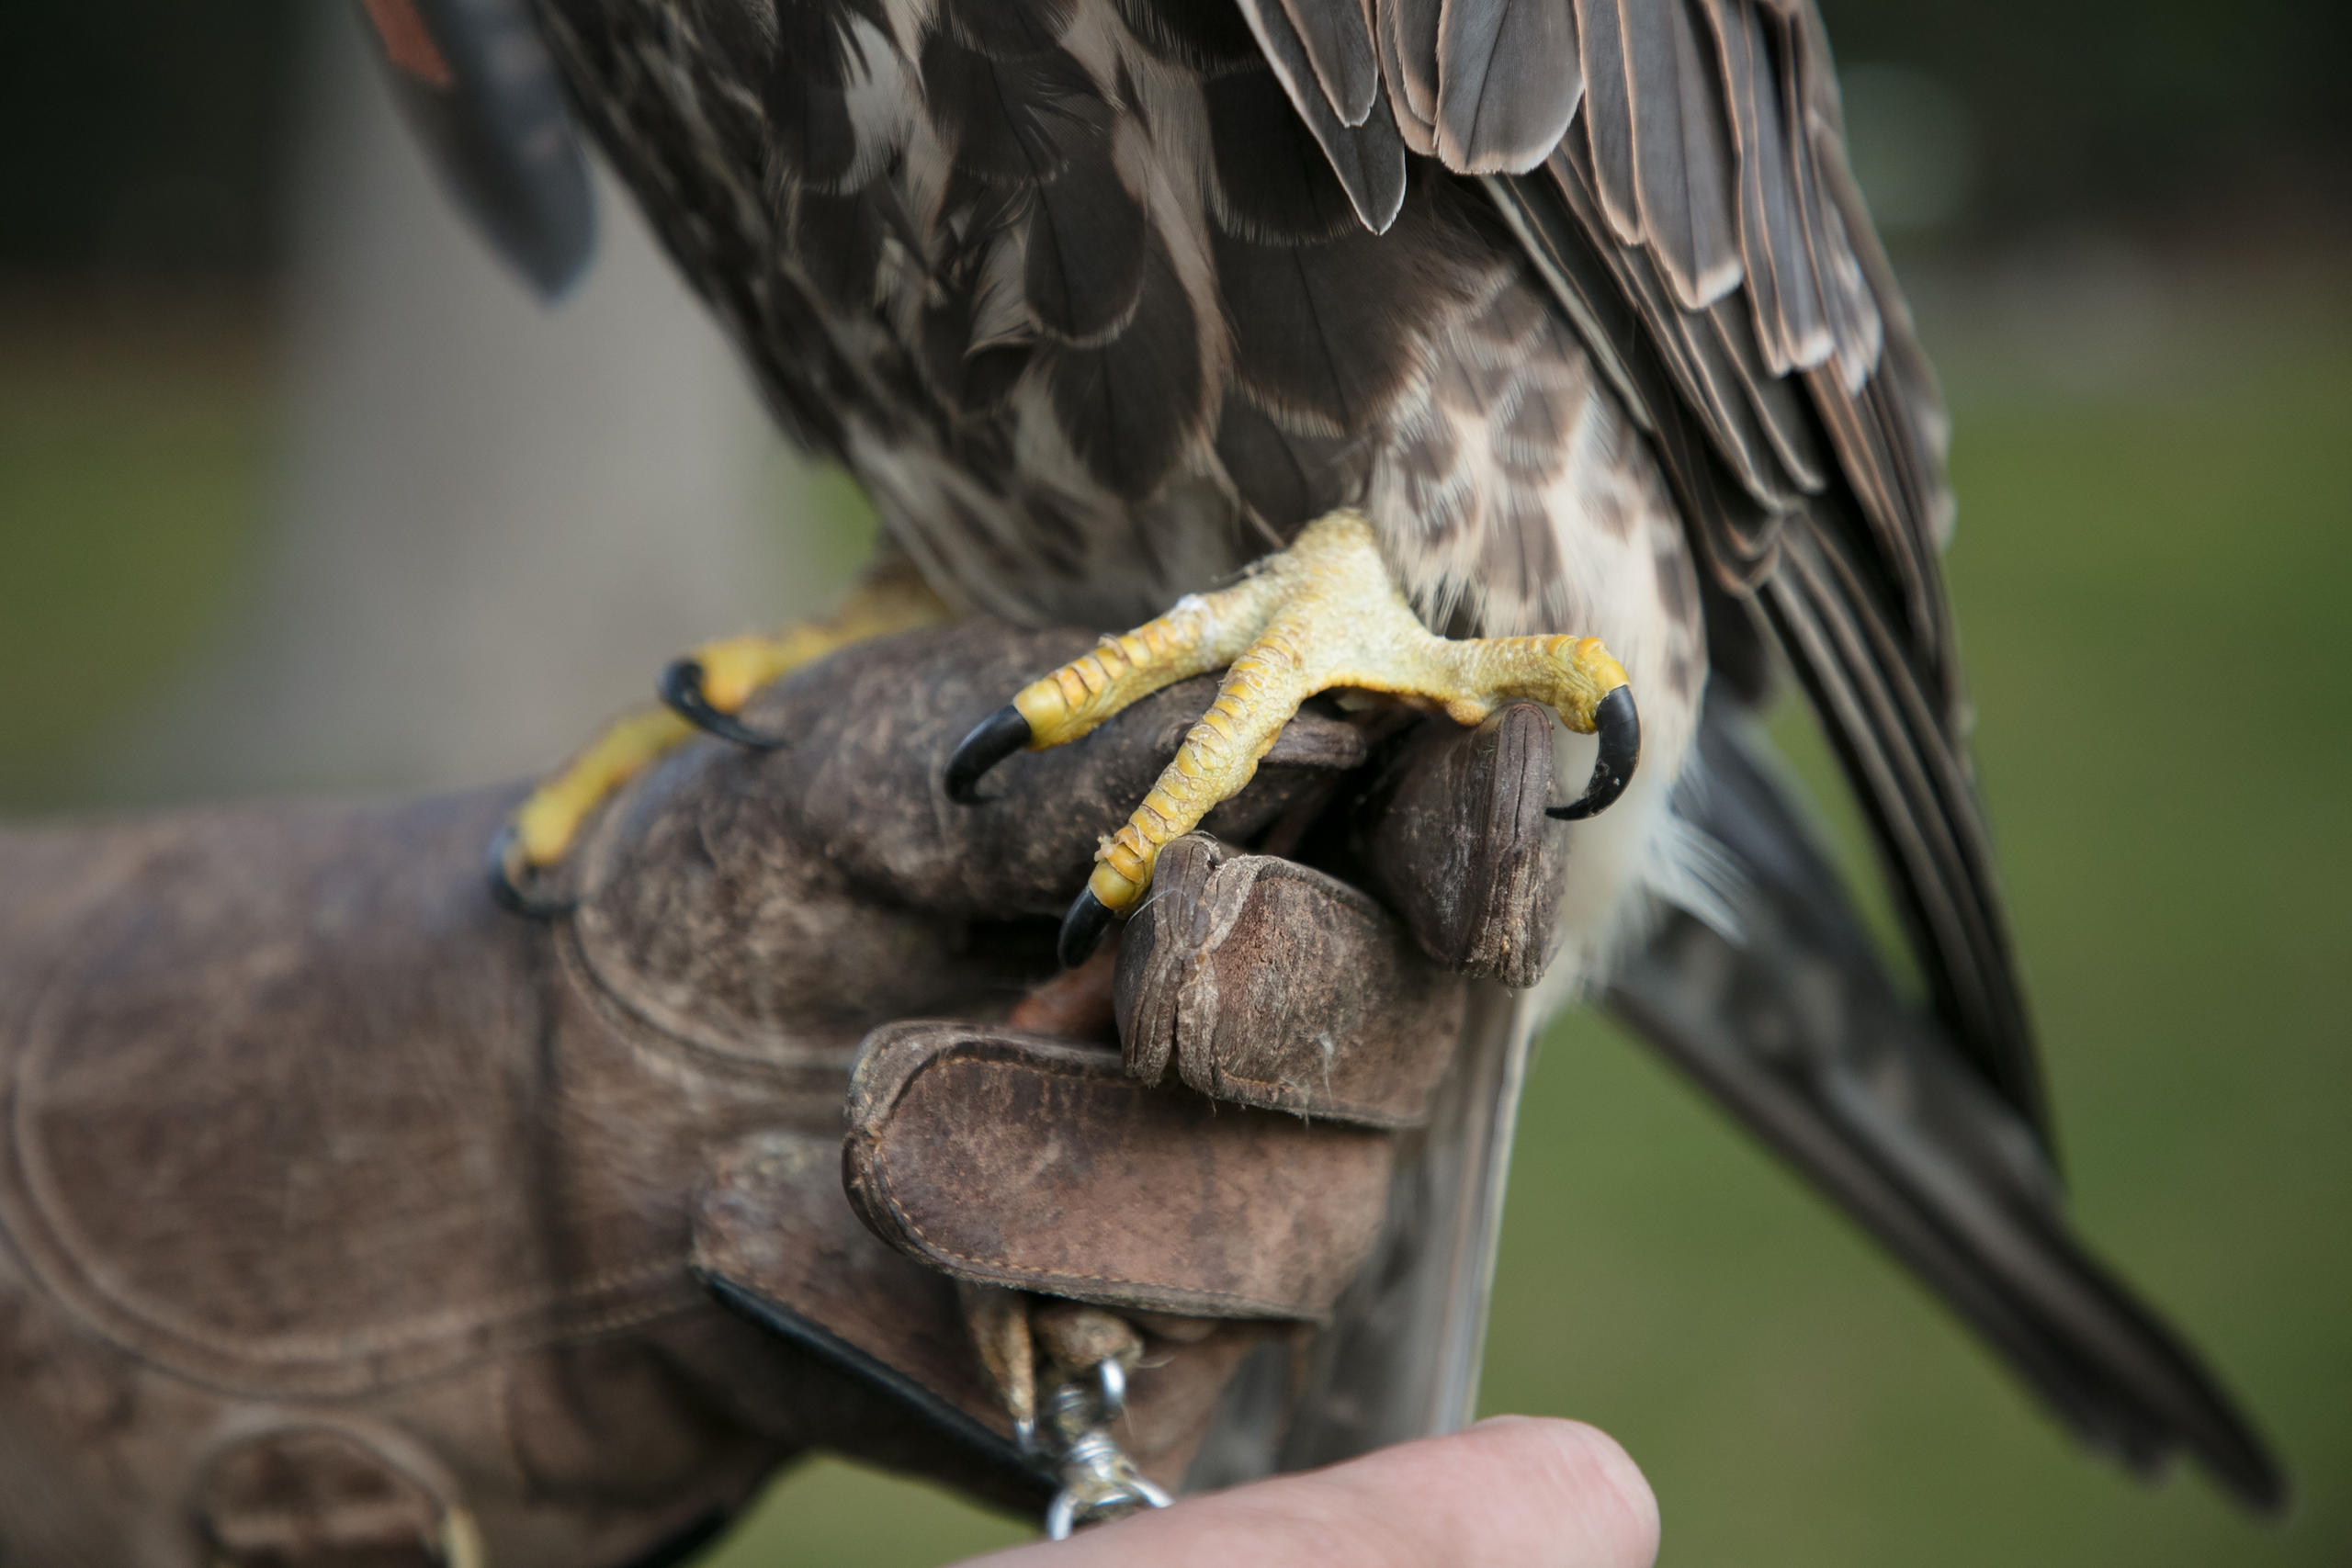 The birds of prey use their claws to kill other animals.